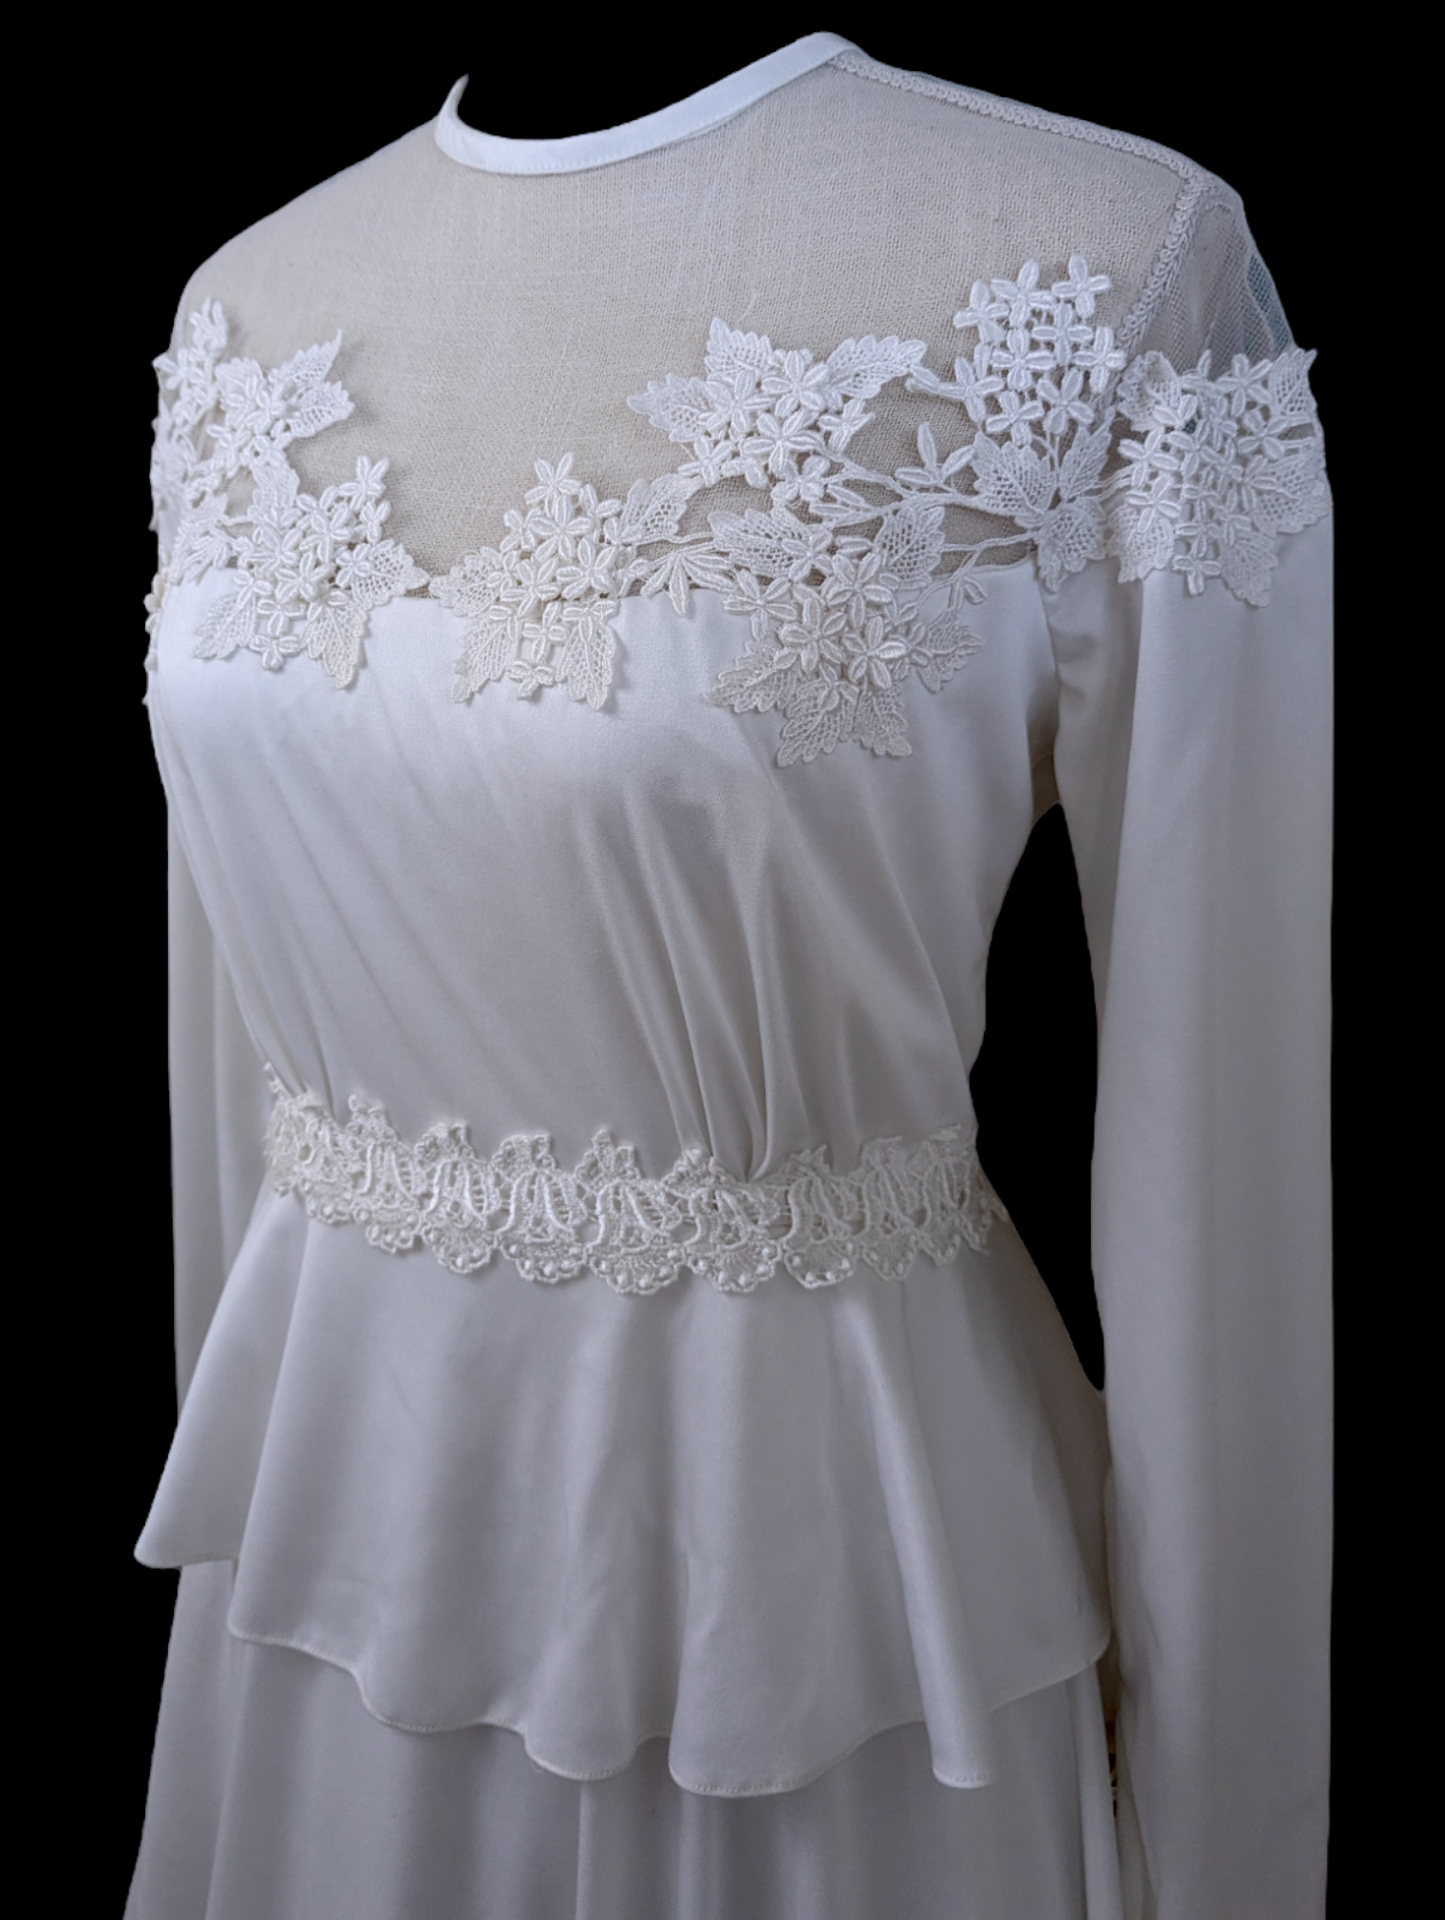 1960s Peplum and Floral Lace Long Sleeve Wedding Dress with Scoop Neckline in Brilliant White